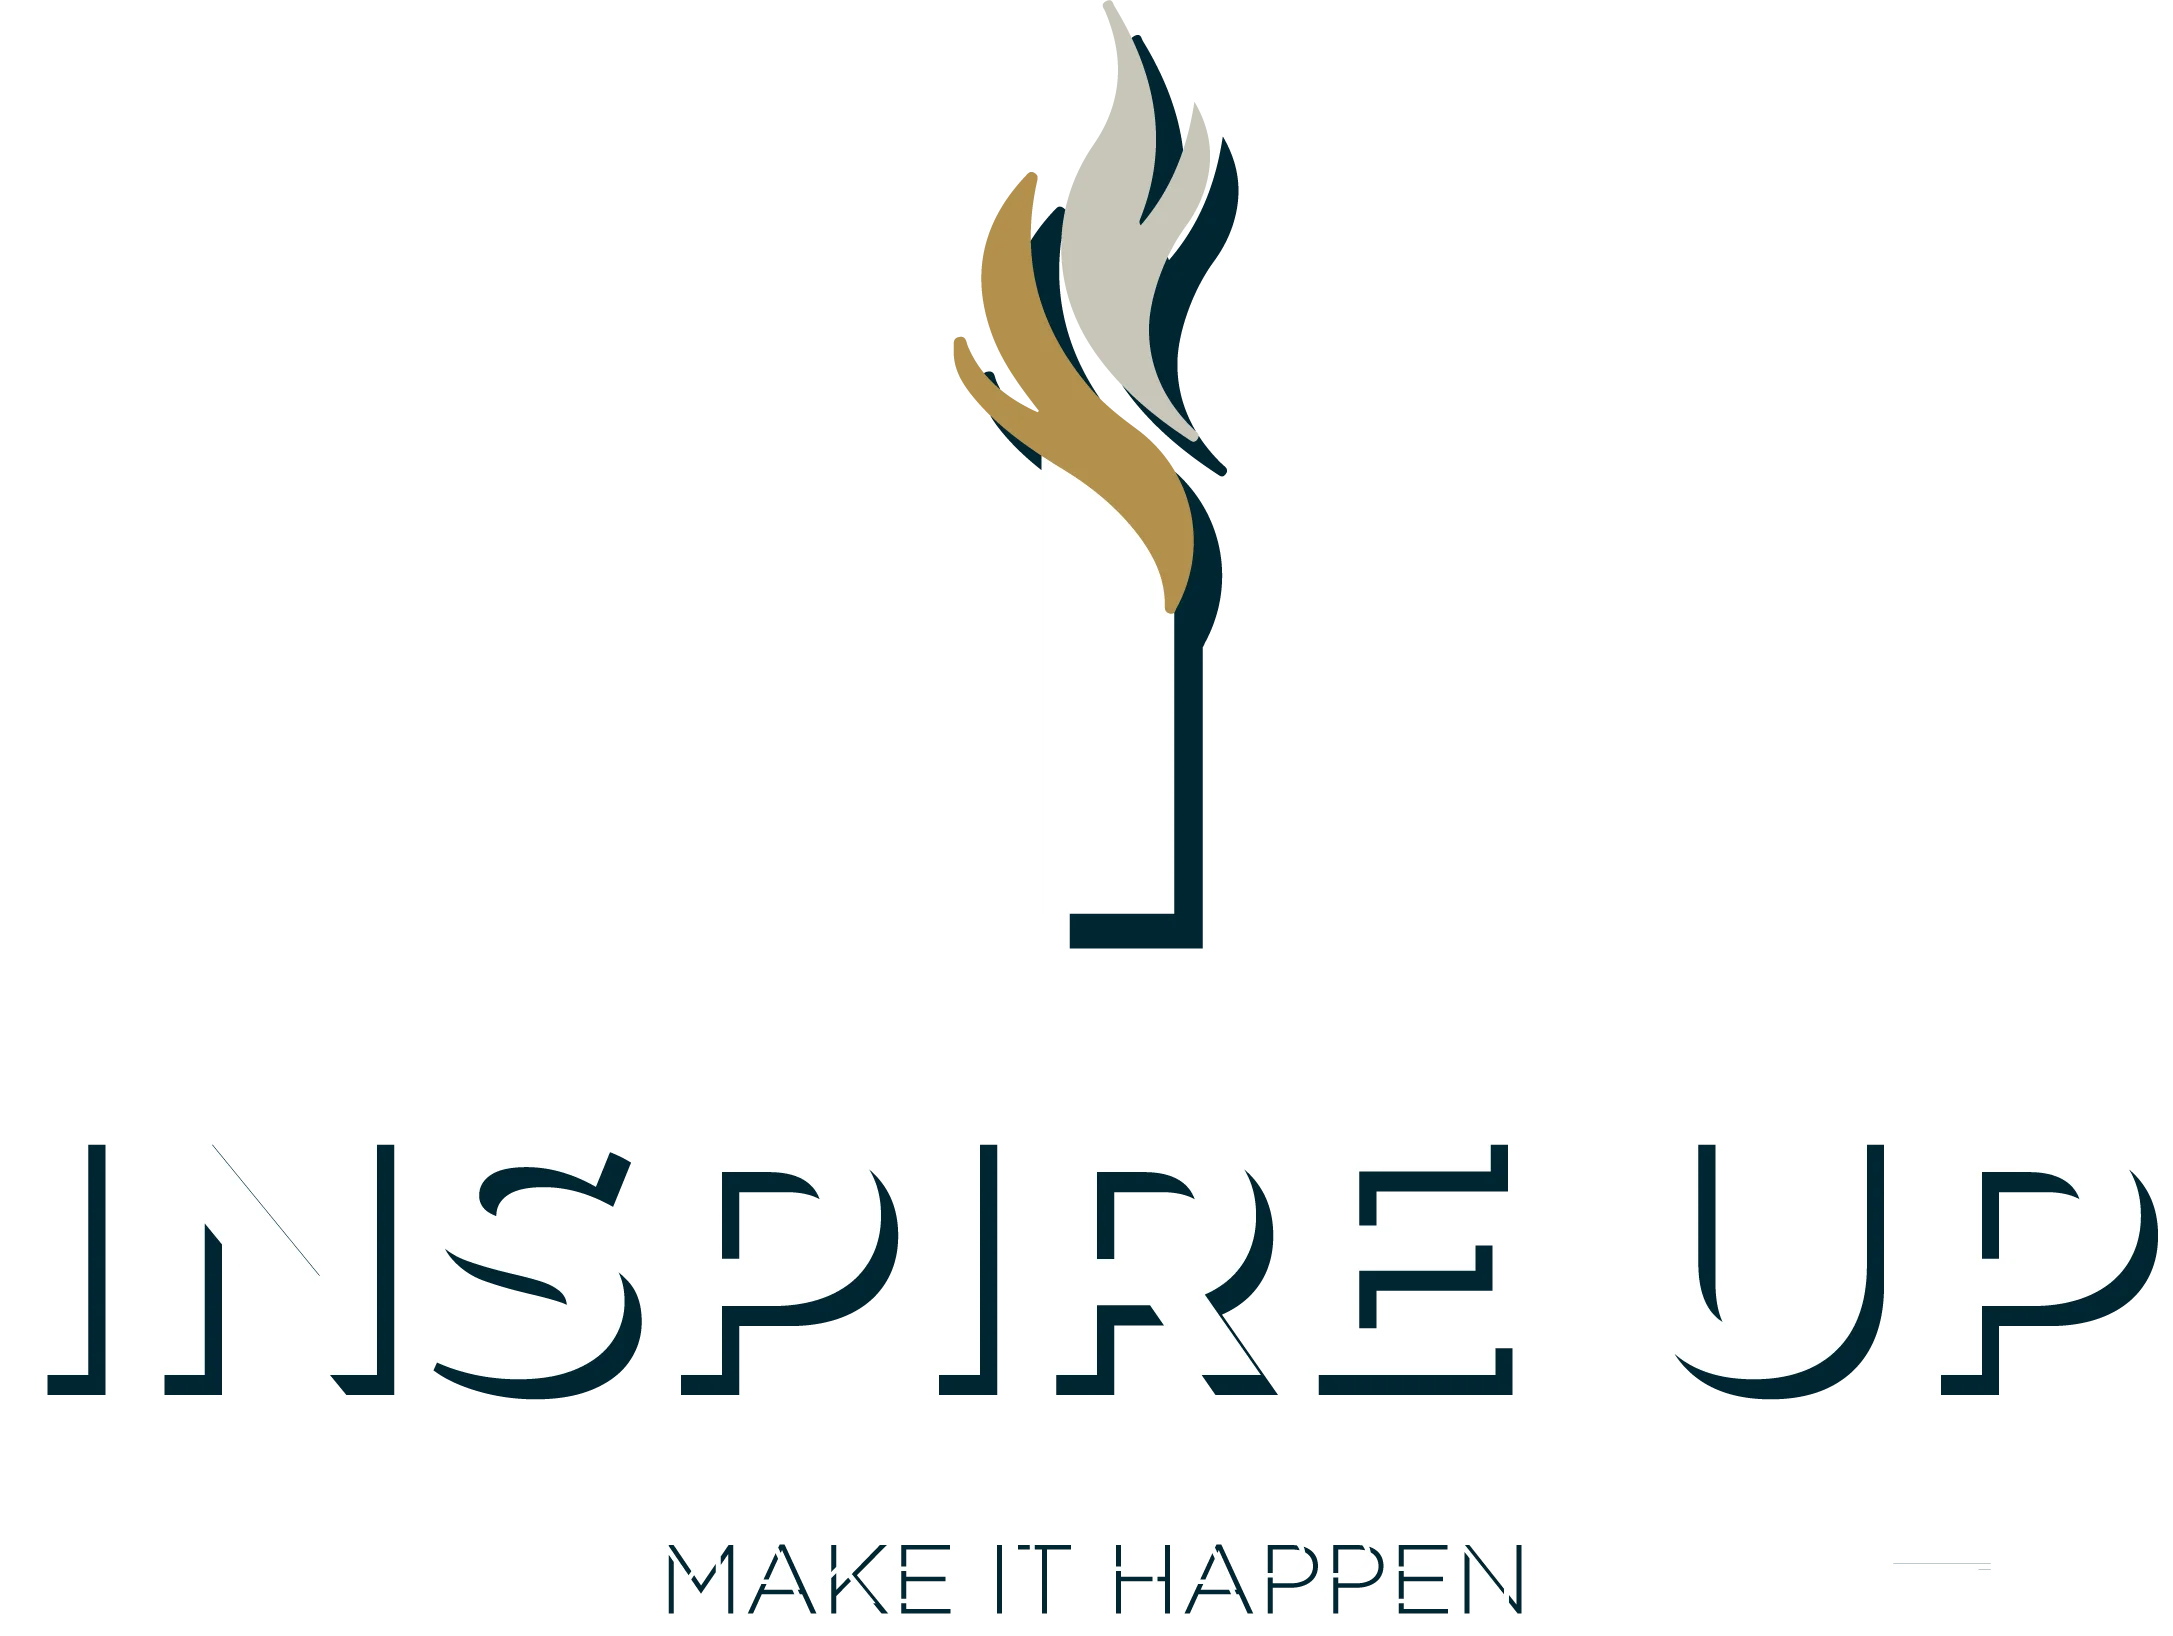 Inspire UP